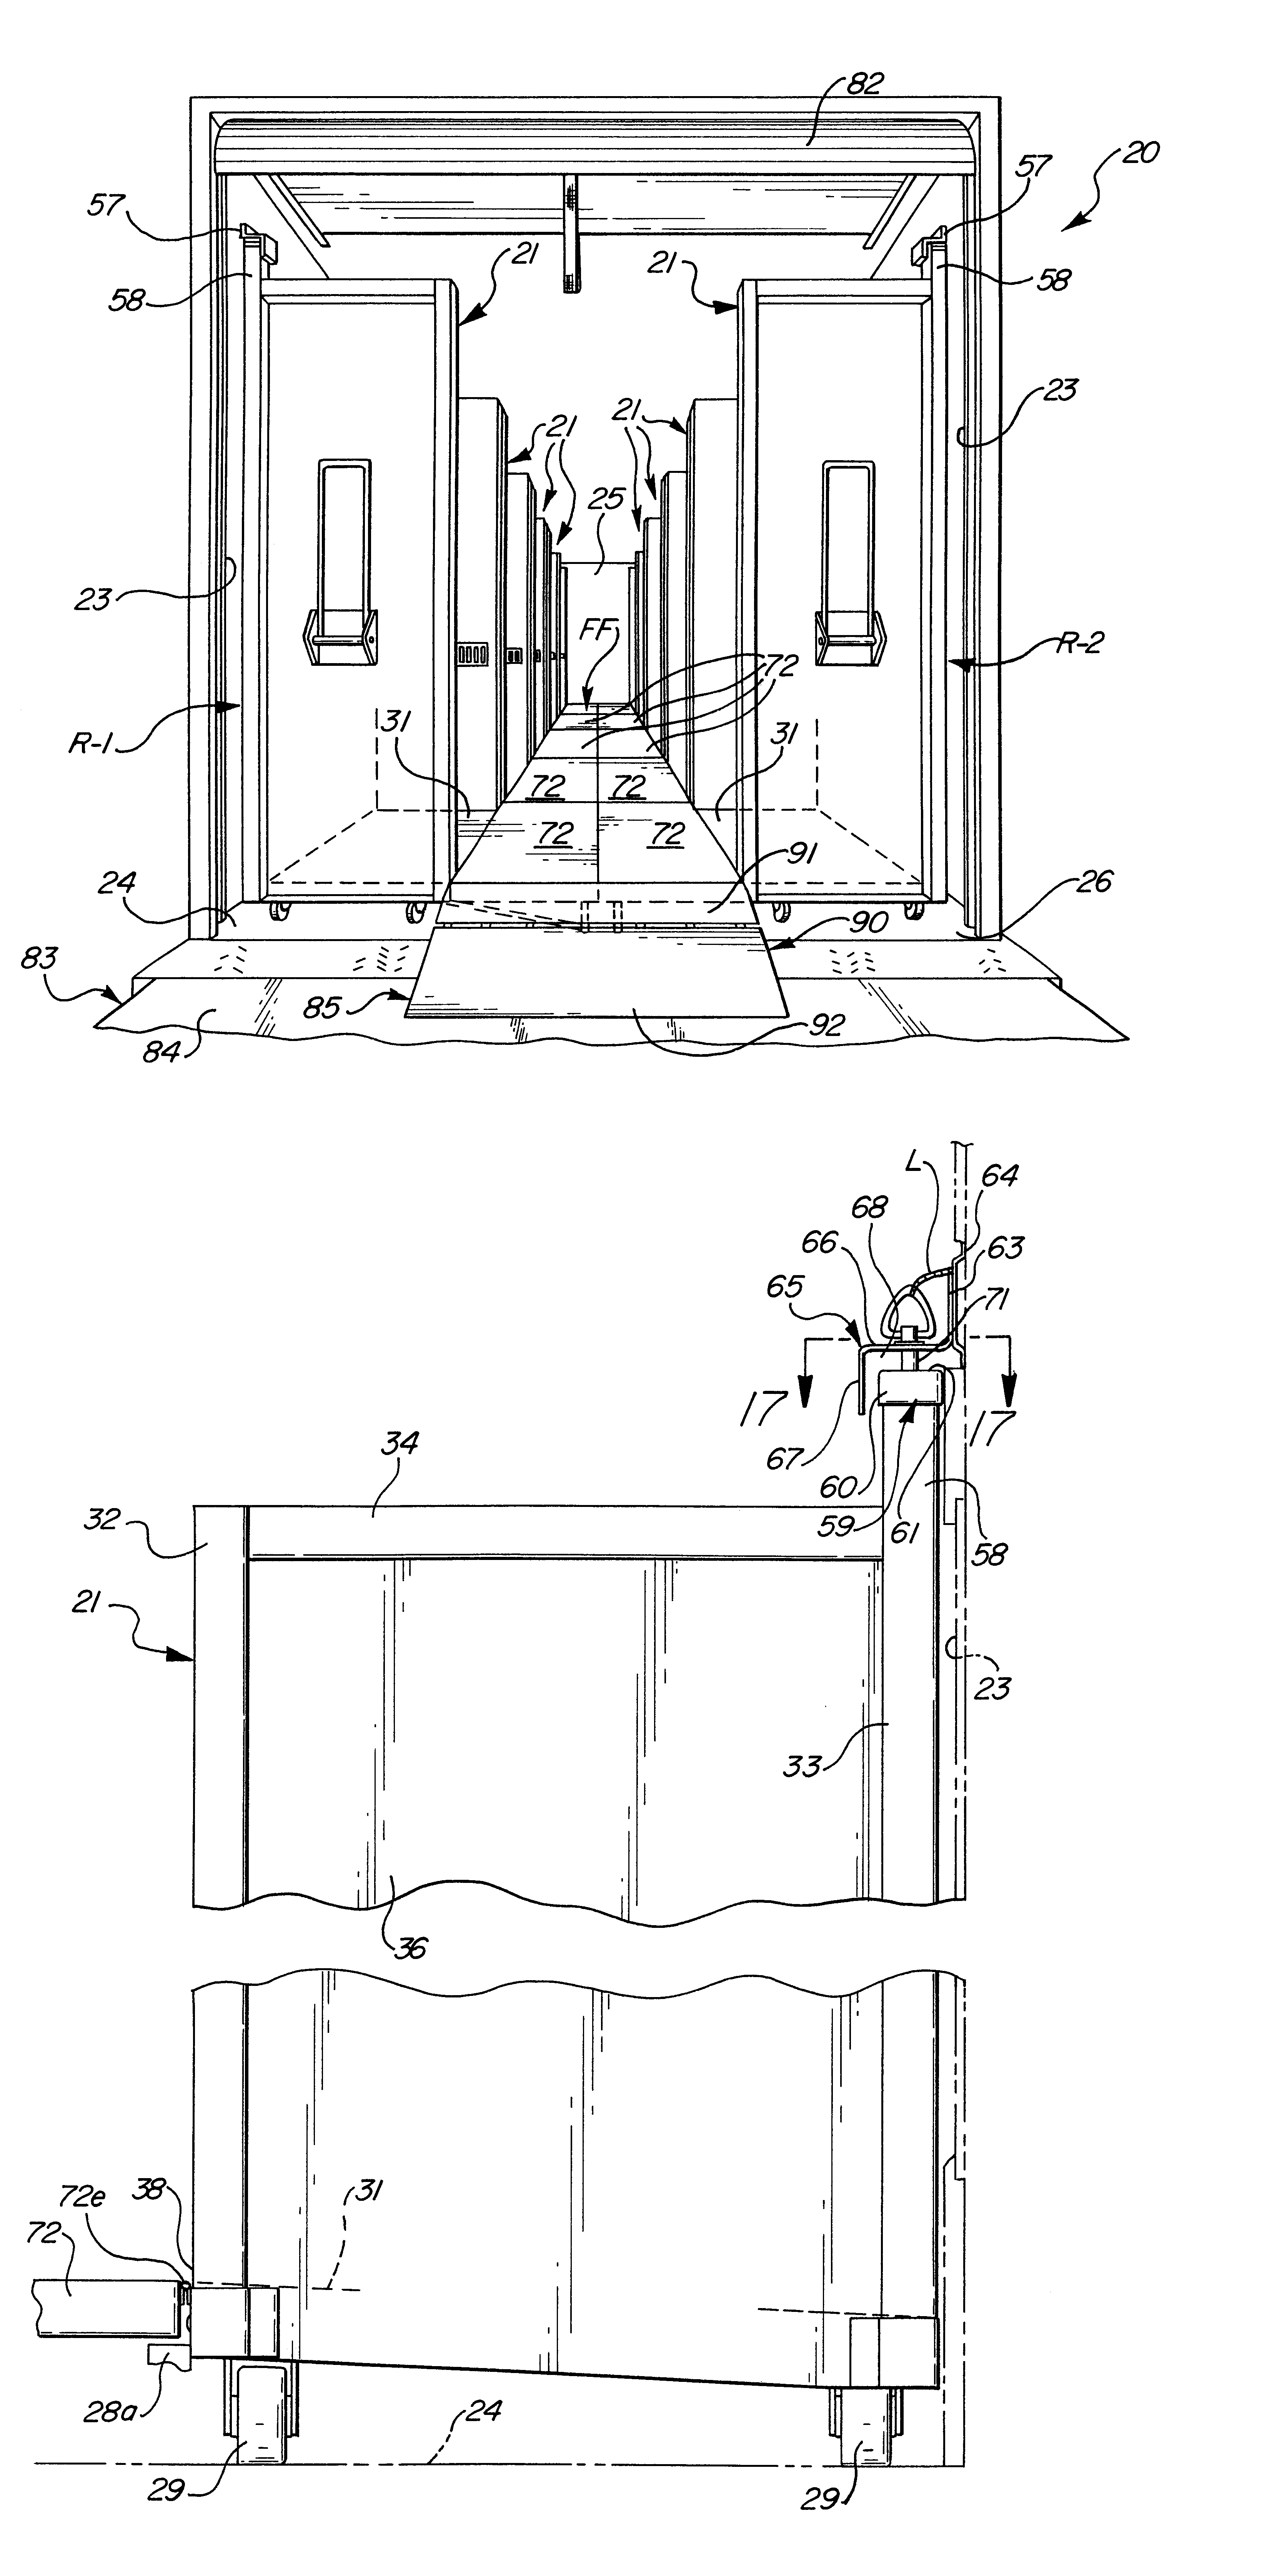 Beverage transport cart system and method of its manufacture and operation